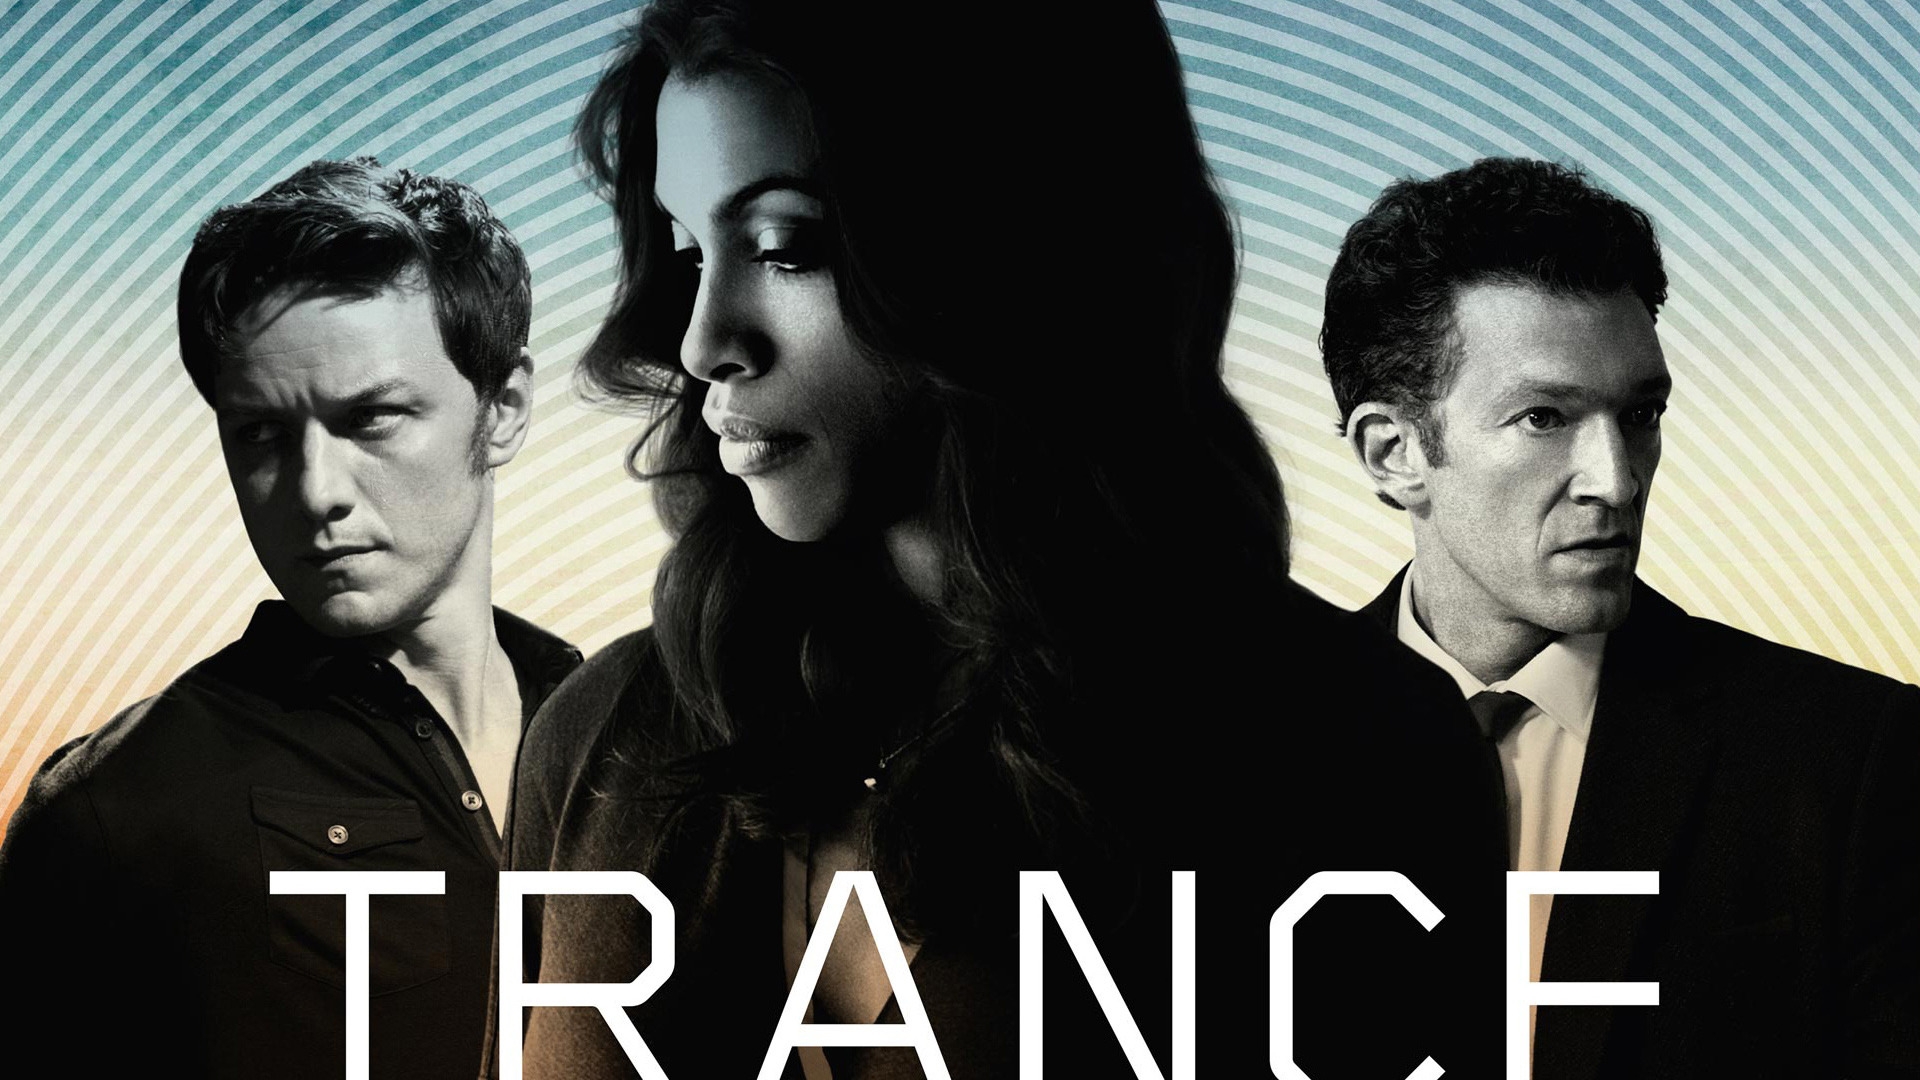 Trance 2013 Movie for 1920 x 1080 HDTV 1080p resolution